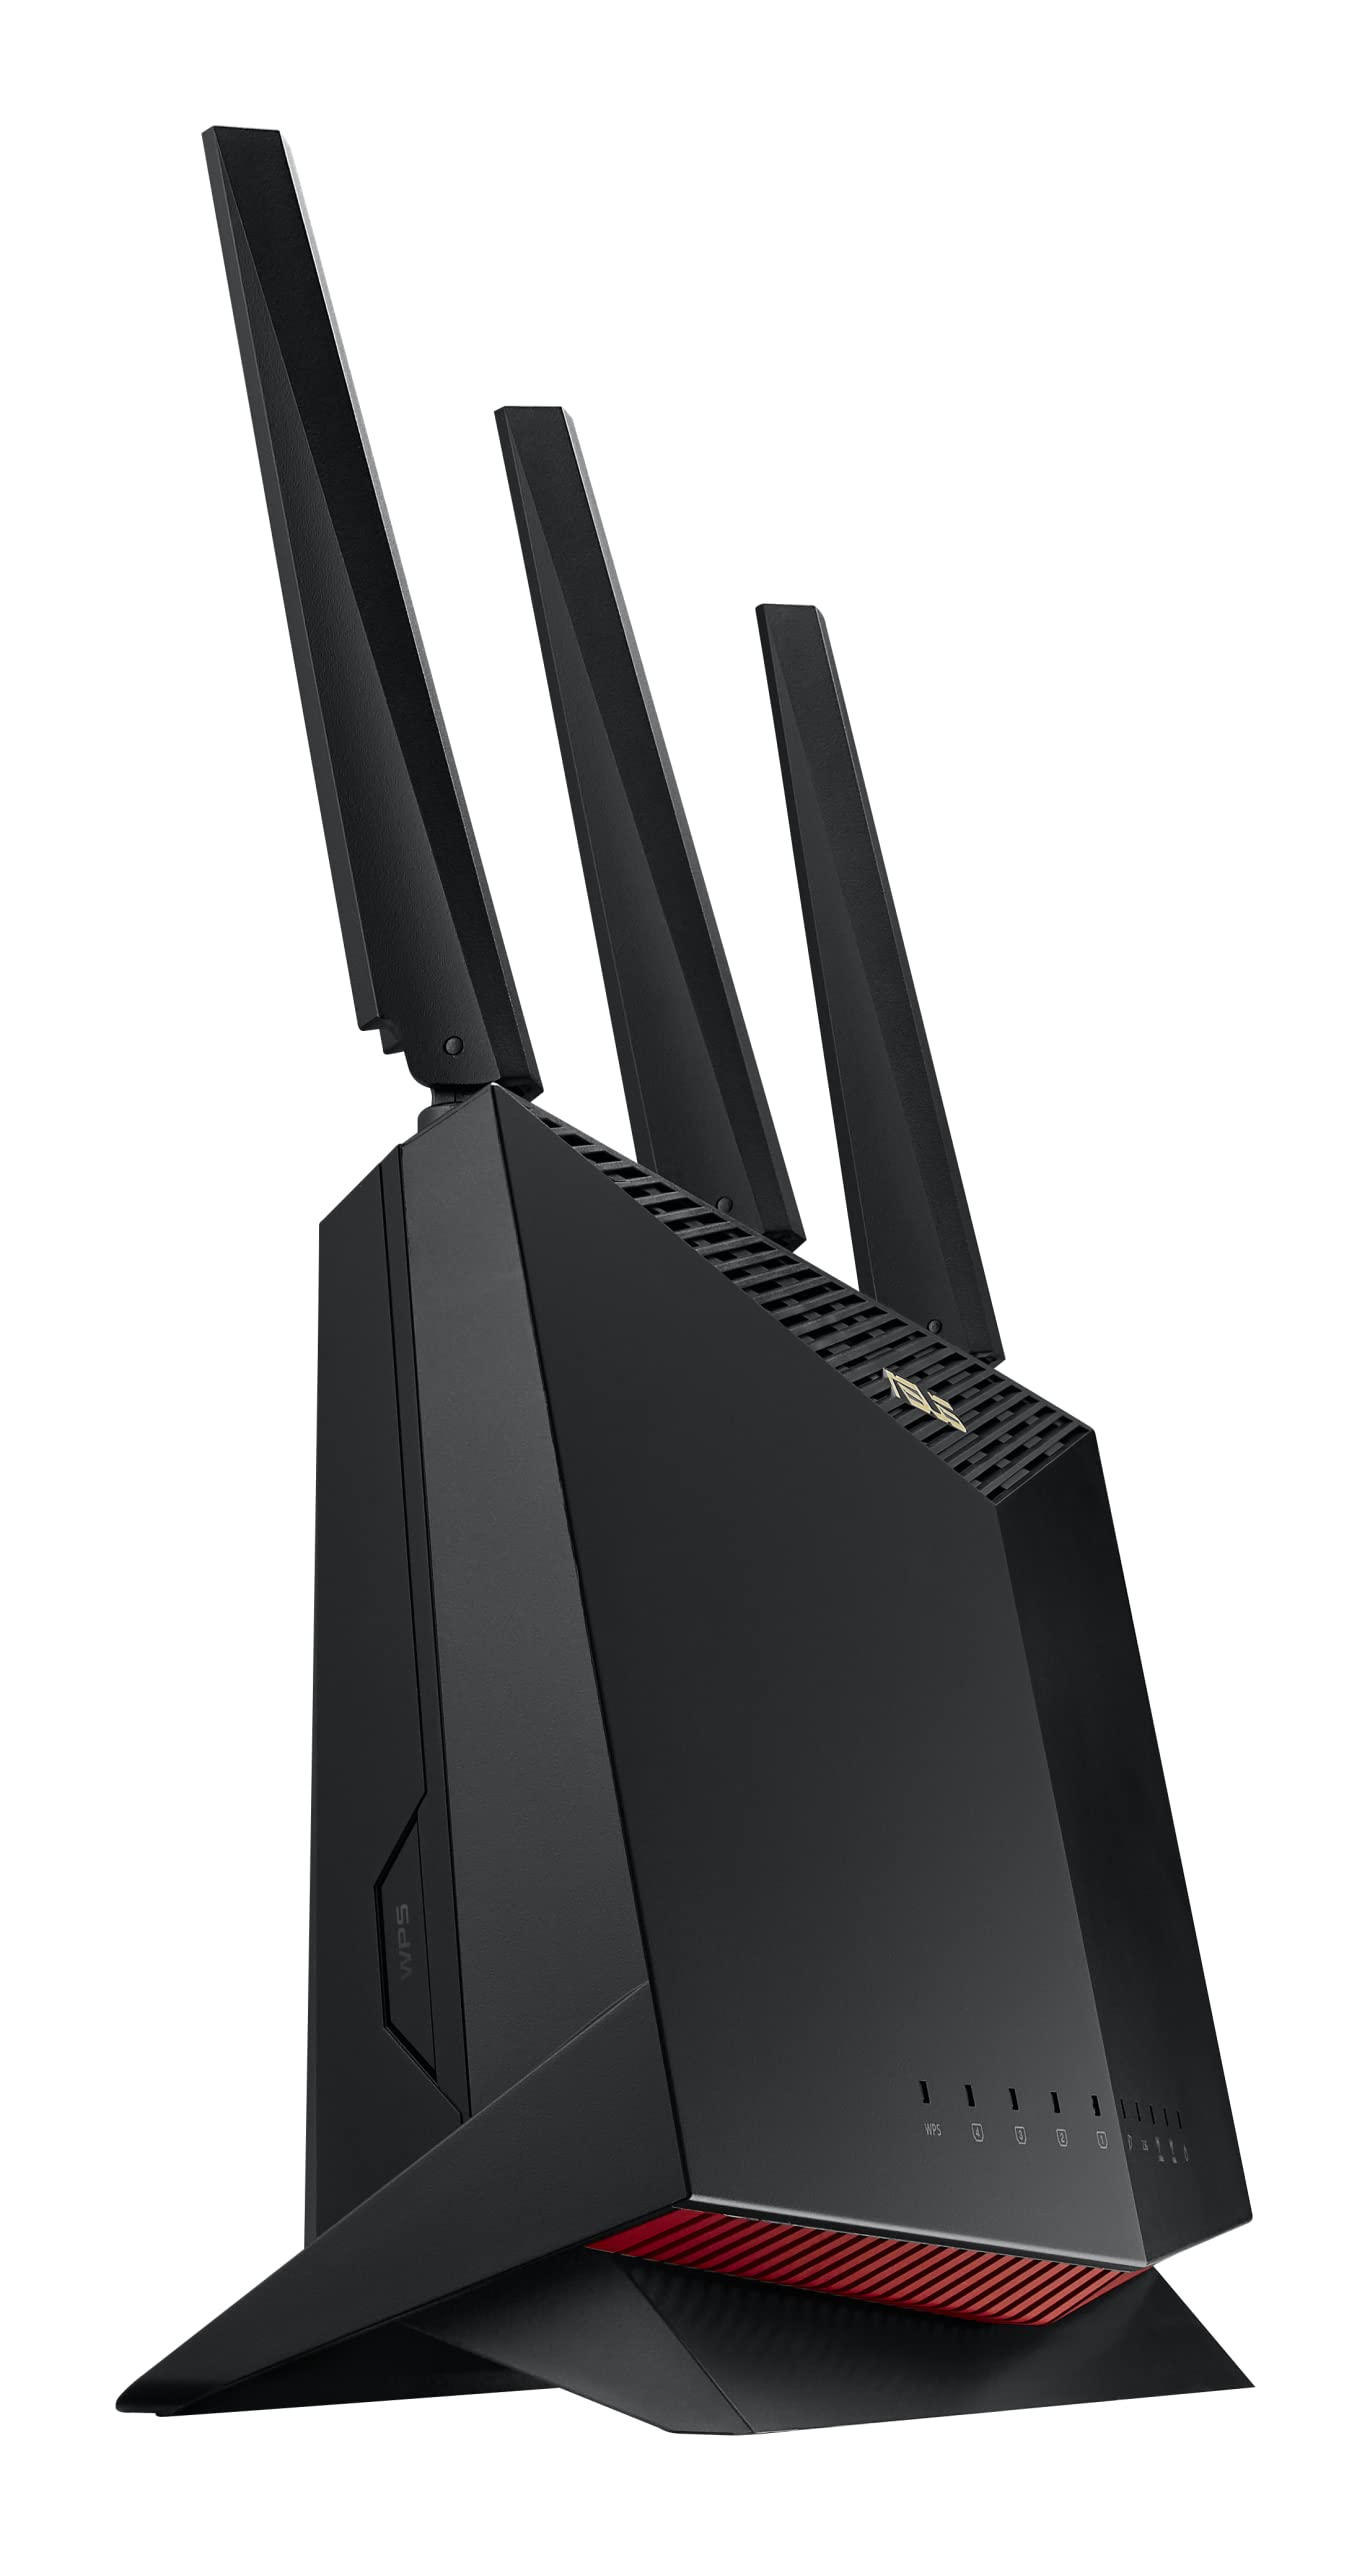 ASUS RT-AX86U Pro (AX5700) Dual Band WiFi 6 Extendable Gaming Router, 2.5G Port, Mobile Game Mode, Port Forwarding, Subscription-Free Network Security, VPN, AiMesh Compatible